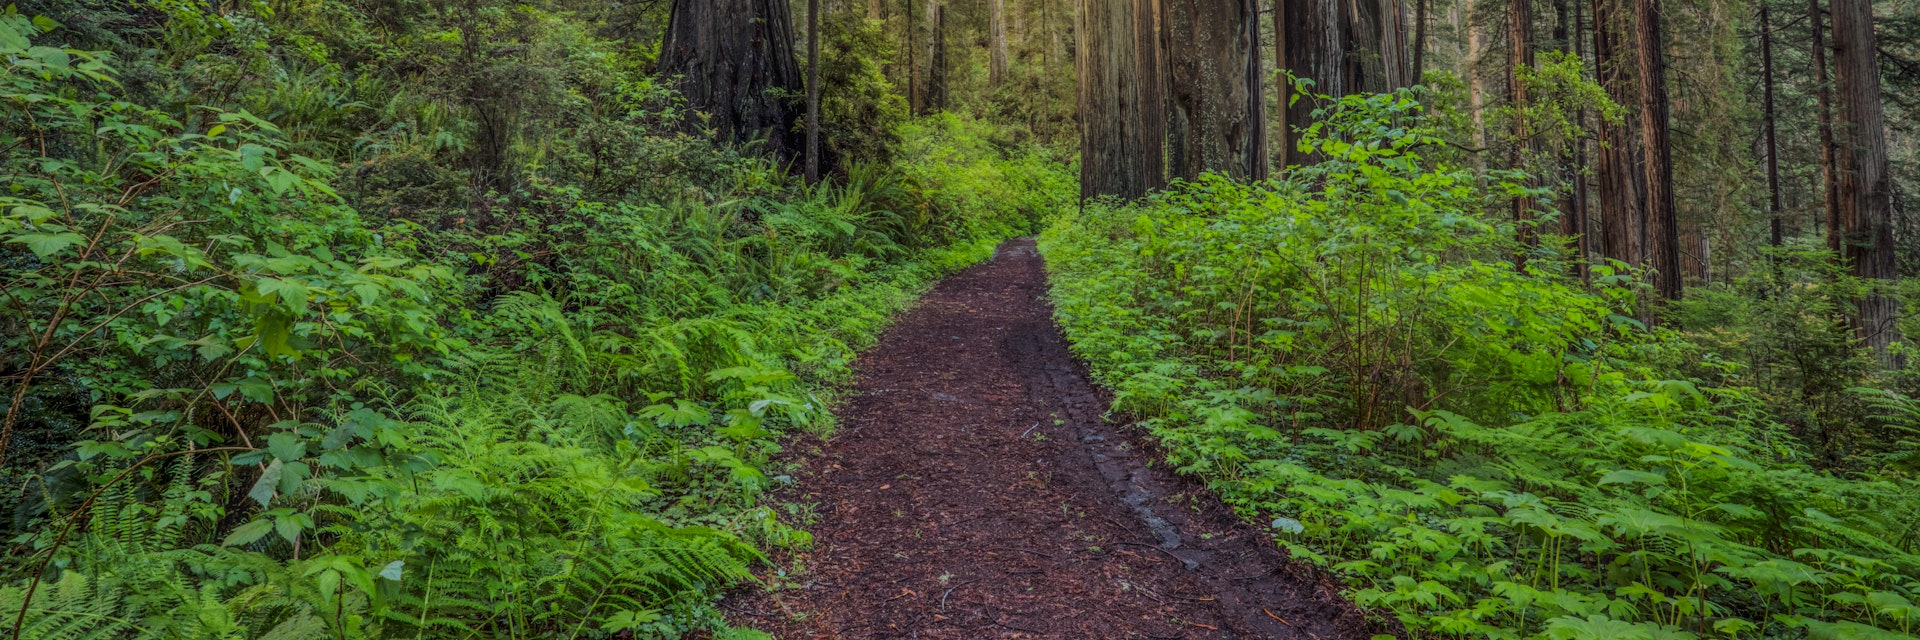 Pathway through ferns and redwood trees on the Damnation Creek Trail in Del Norte Coast Redwoods State Park.